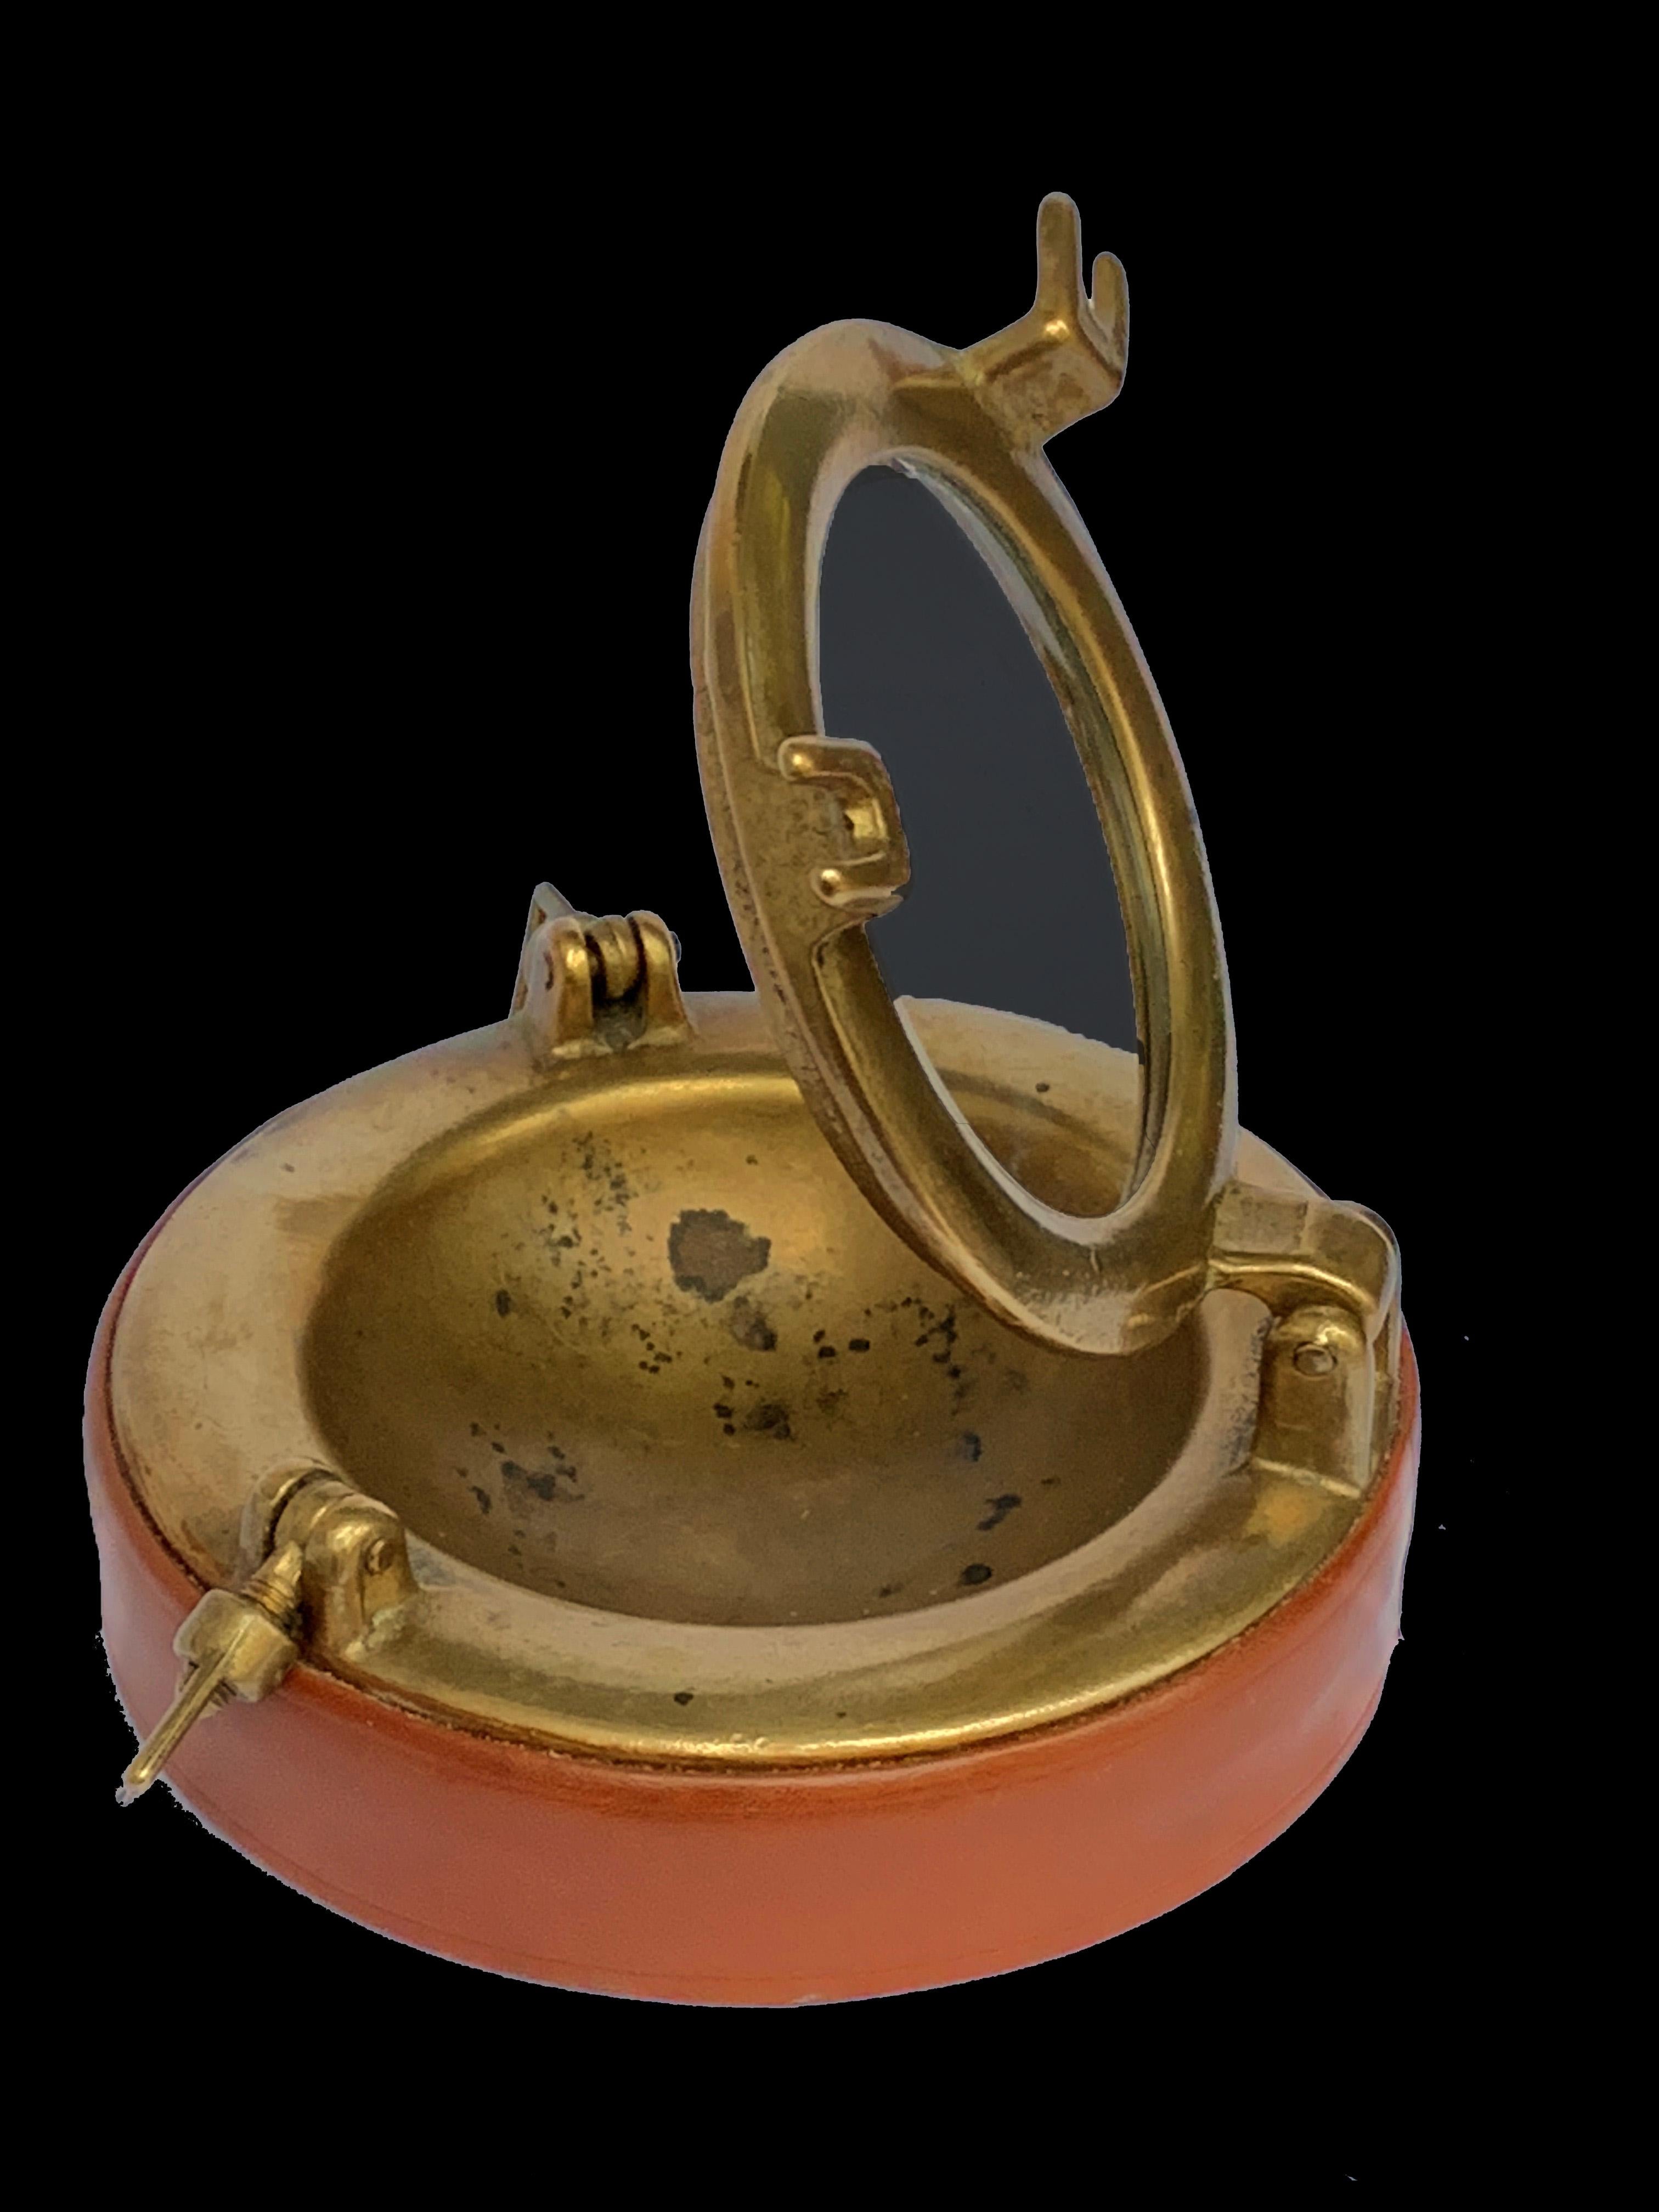 20th Century Porthole, Ashtray in Brass and Leather, 1960s Designed by Gucci, Italy, 1960s